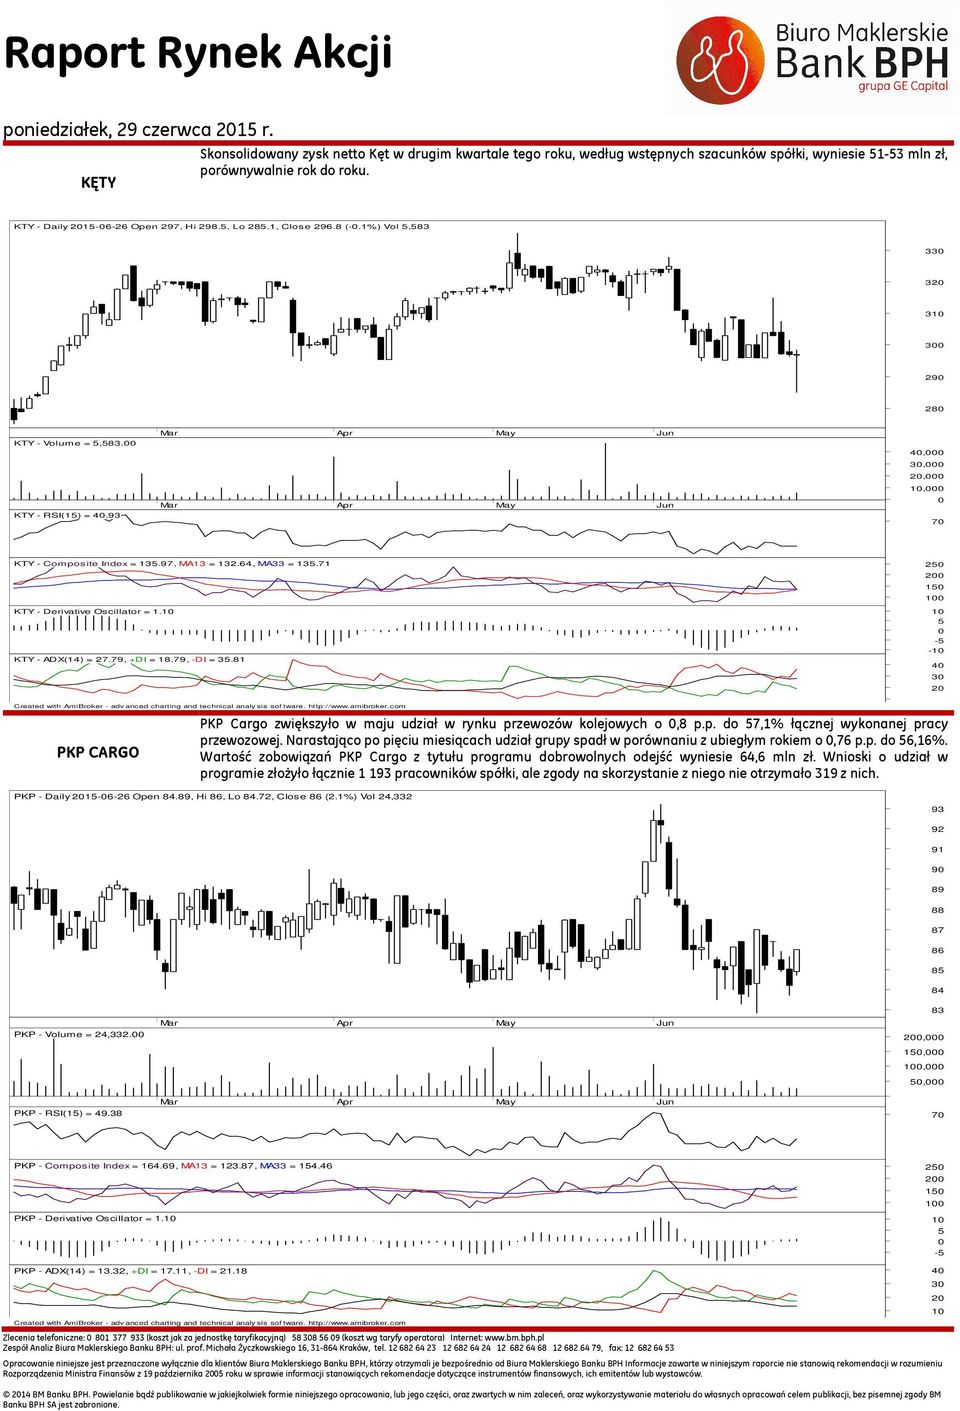 71 KTY - Derivative Oscillator = 1.1 KTY - ADX(14) = 27.79, +DI = 18.79, -DI = 3.81 2 2 1 1 1 - -1 4 3 2 Created with AmiBroker - advanced charting and technical analy sis sof tware. http://www.